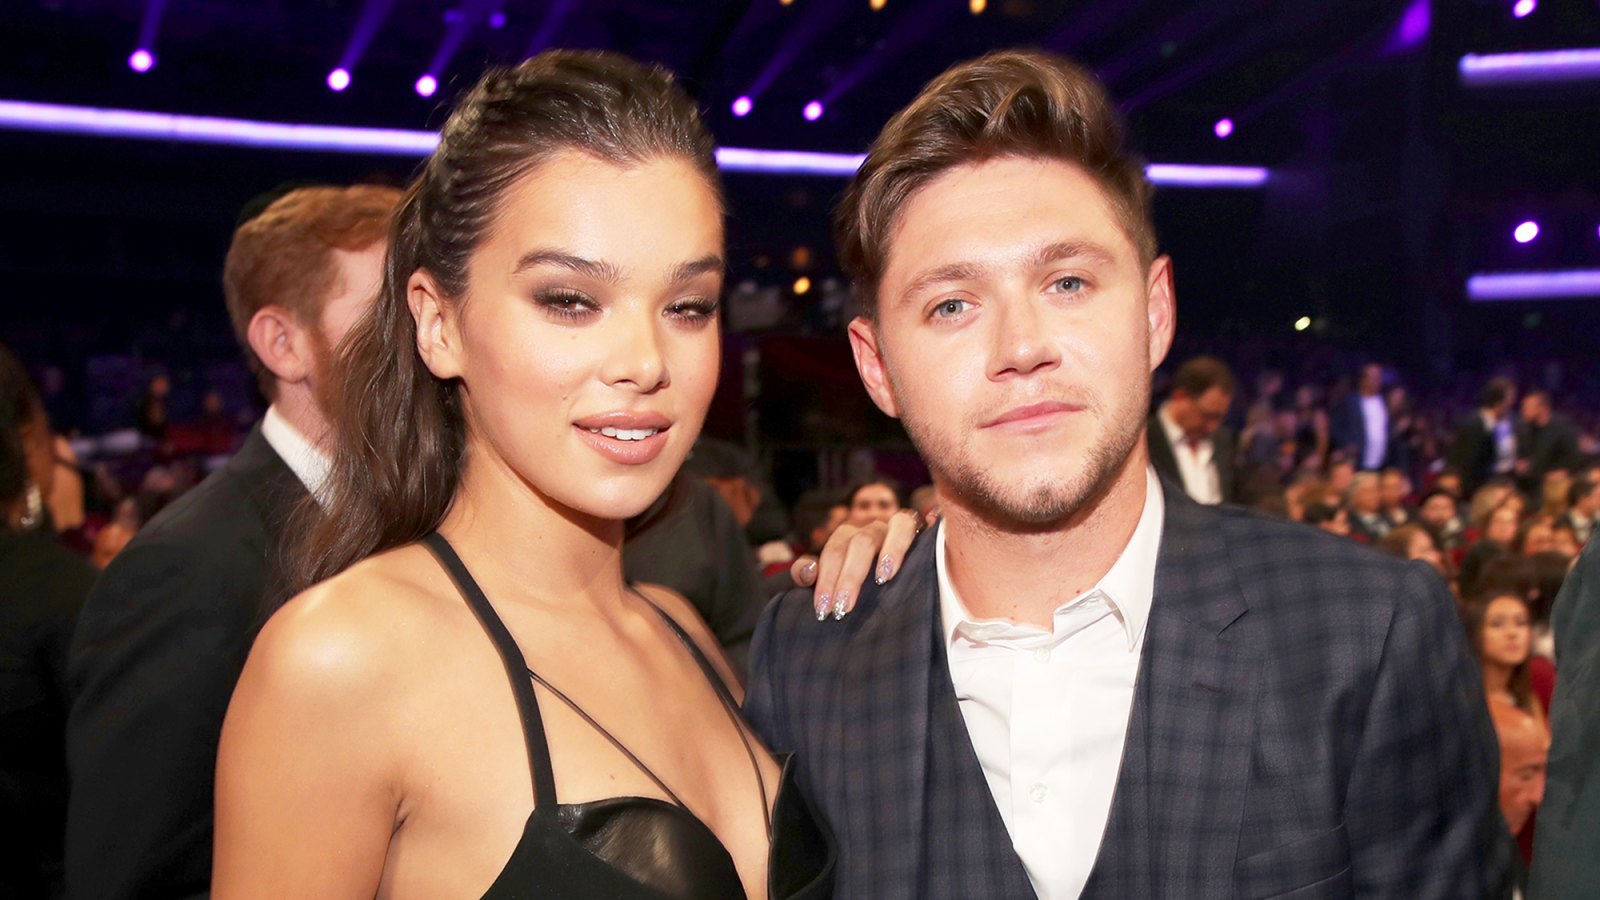 Hailee Steinfeld and Niall Horan during the 2017 American Music Awards at Microsoft Theater on November 19, 2017 in Los Angeles, California.